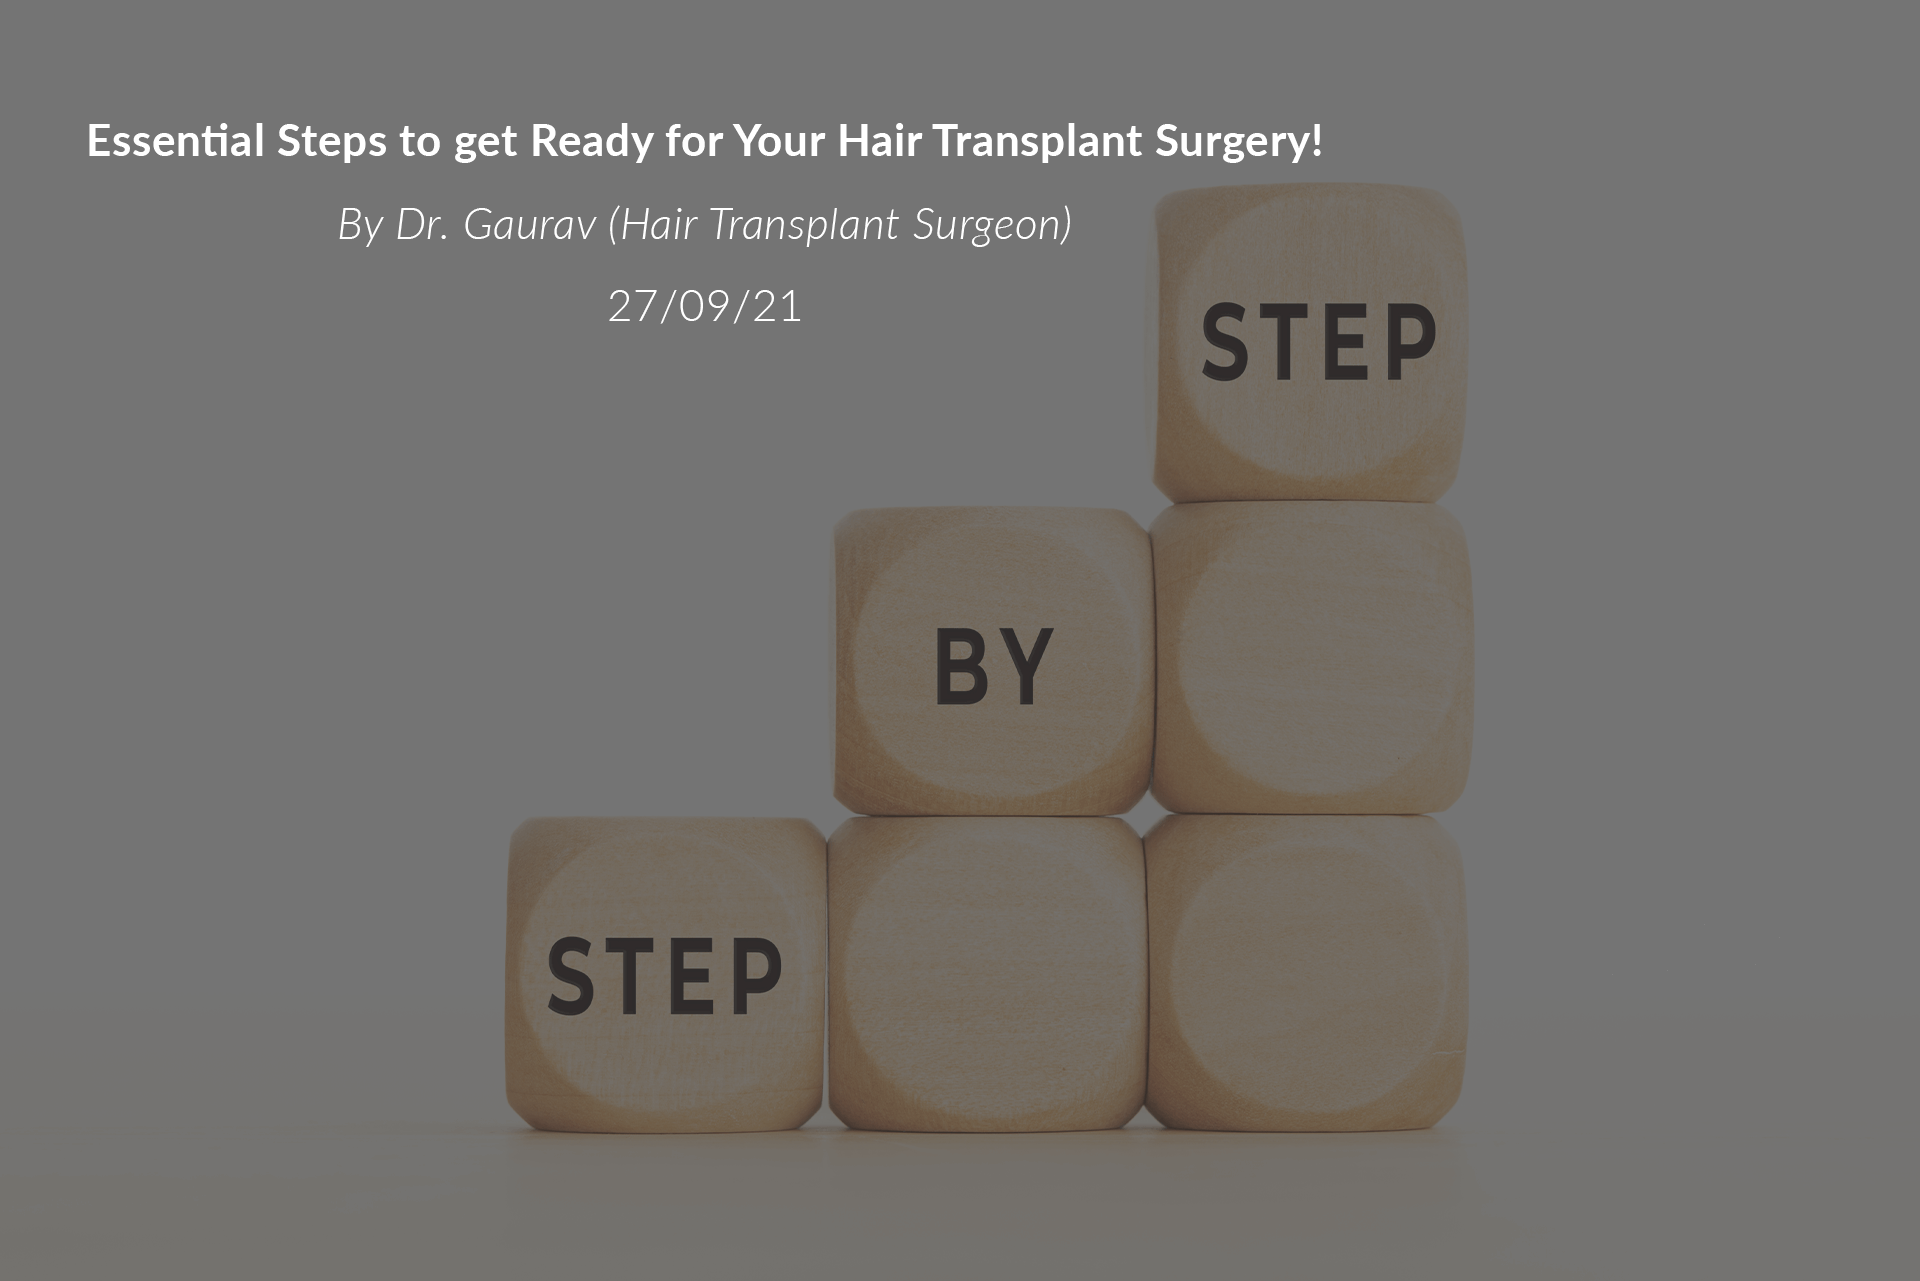 Essential Steps to get Ready for Your Hair Transplant Surgery!